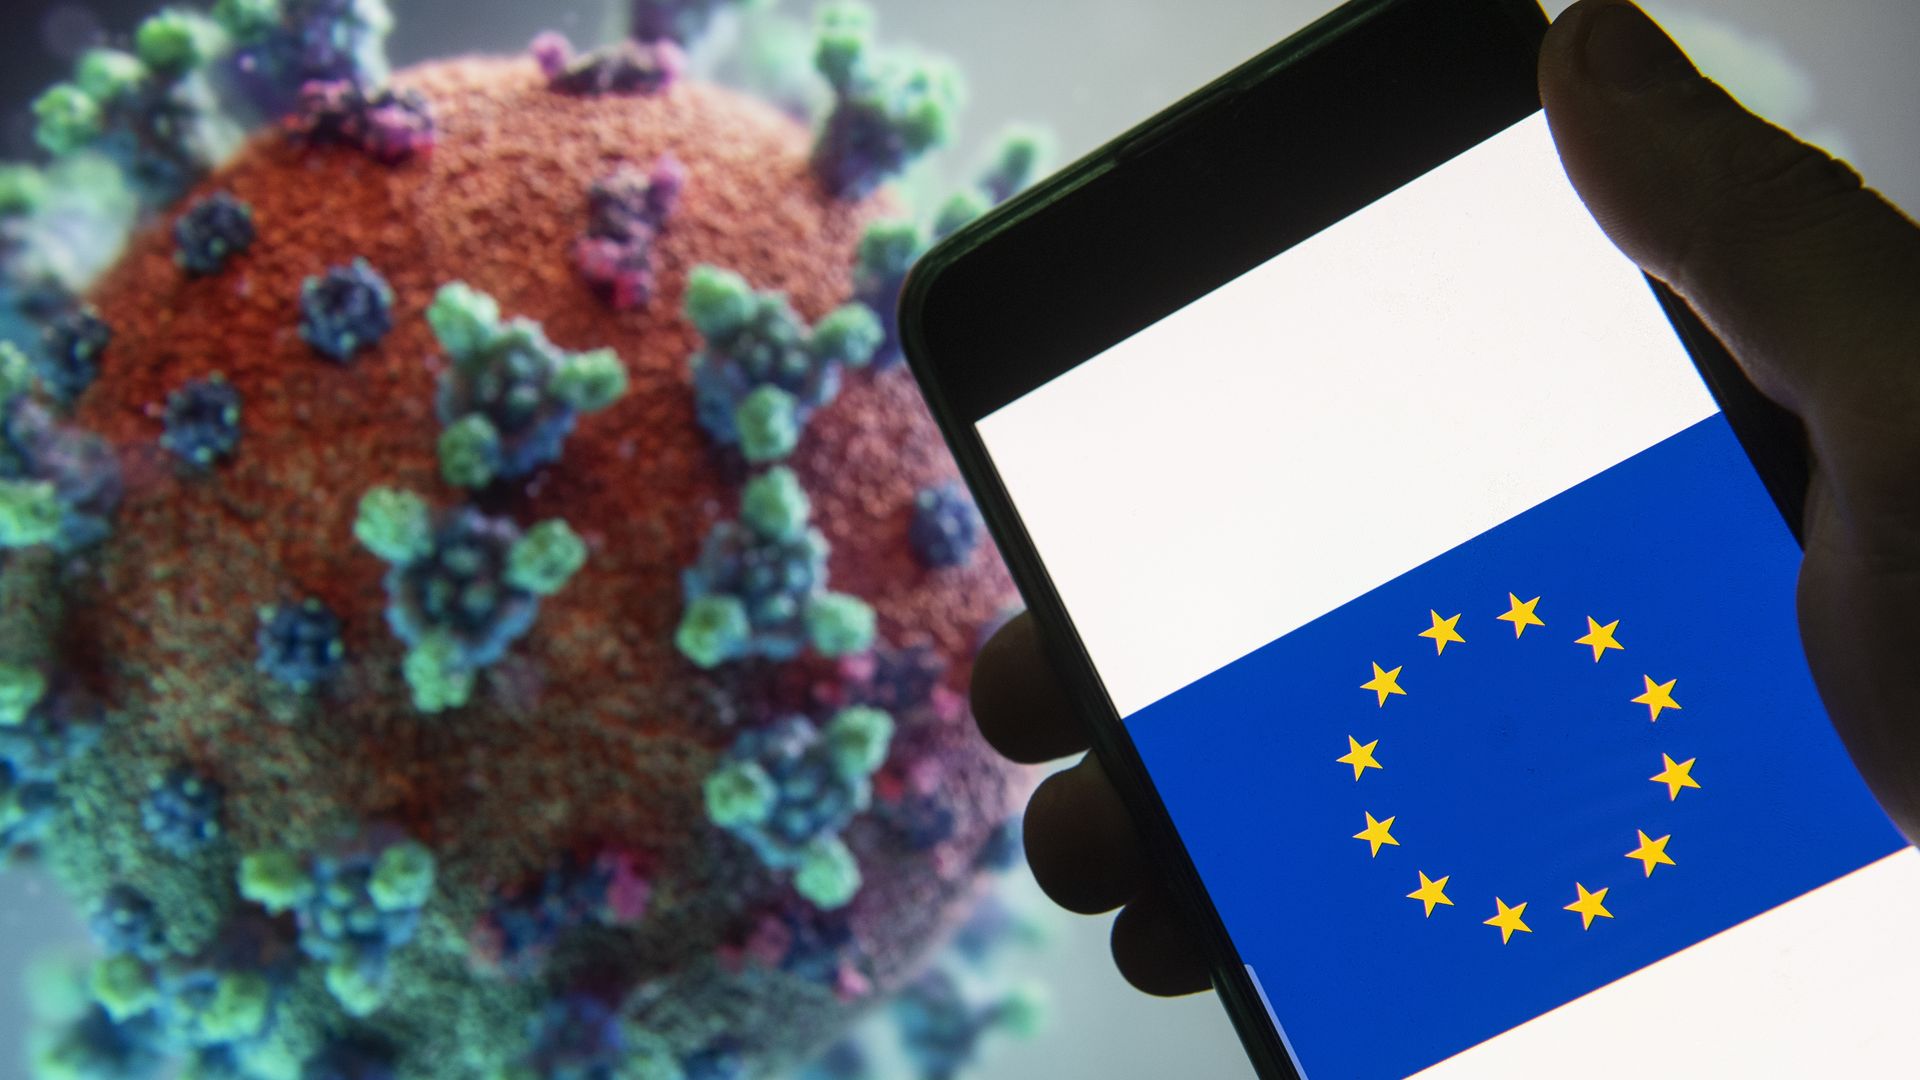 The EU symbol in front of an image of the coronavirus.